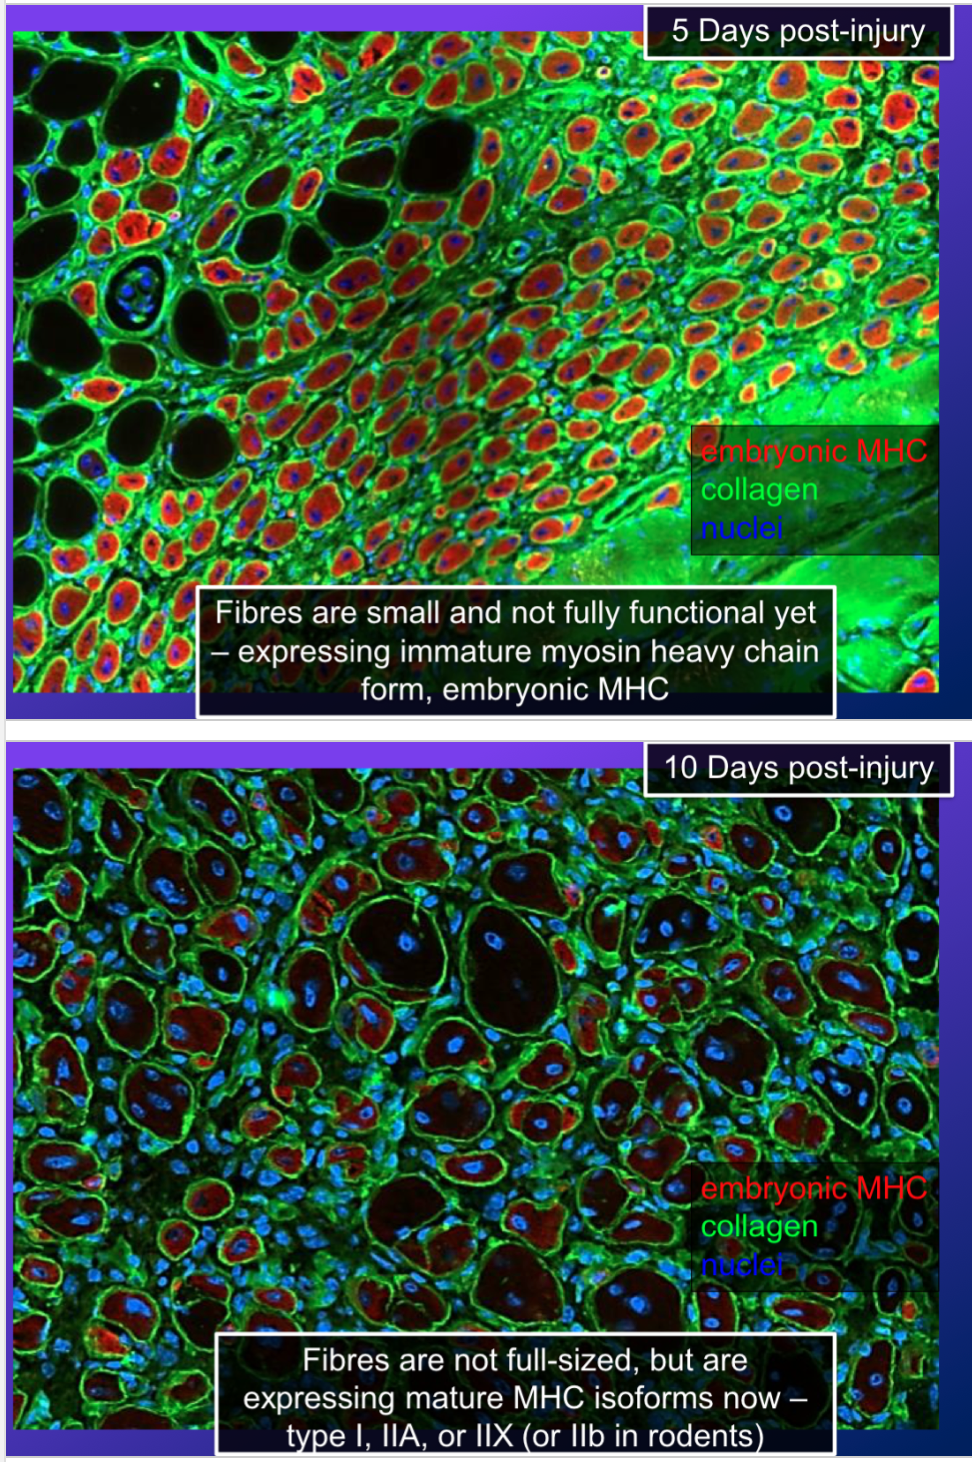 <p>-at 5 days post injury, they stained for embryonic MHC, collagen, and nuclei</p><ul><li><p>there were a lot of newly formed cells that are not functional yet, and they all have central nuclei and express immature myosin heavy chain form, which is the embryonic MHC from the satellite cells =&gt; can still differentiate into every type of muscle fibre</p></li></ul><p>-at 10 days post injury, the fibres are still not full sized and have central nuclei, but but the embryonic MHC no longer stains, so the cells express mature MHC isoforms now (type 1, 2a, or 2x)</p>